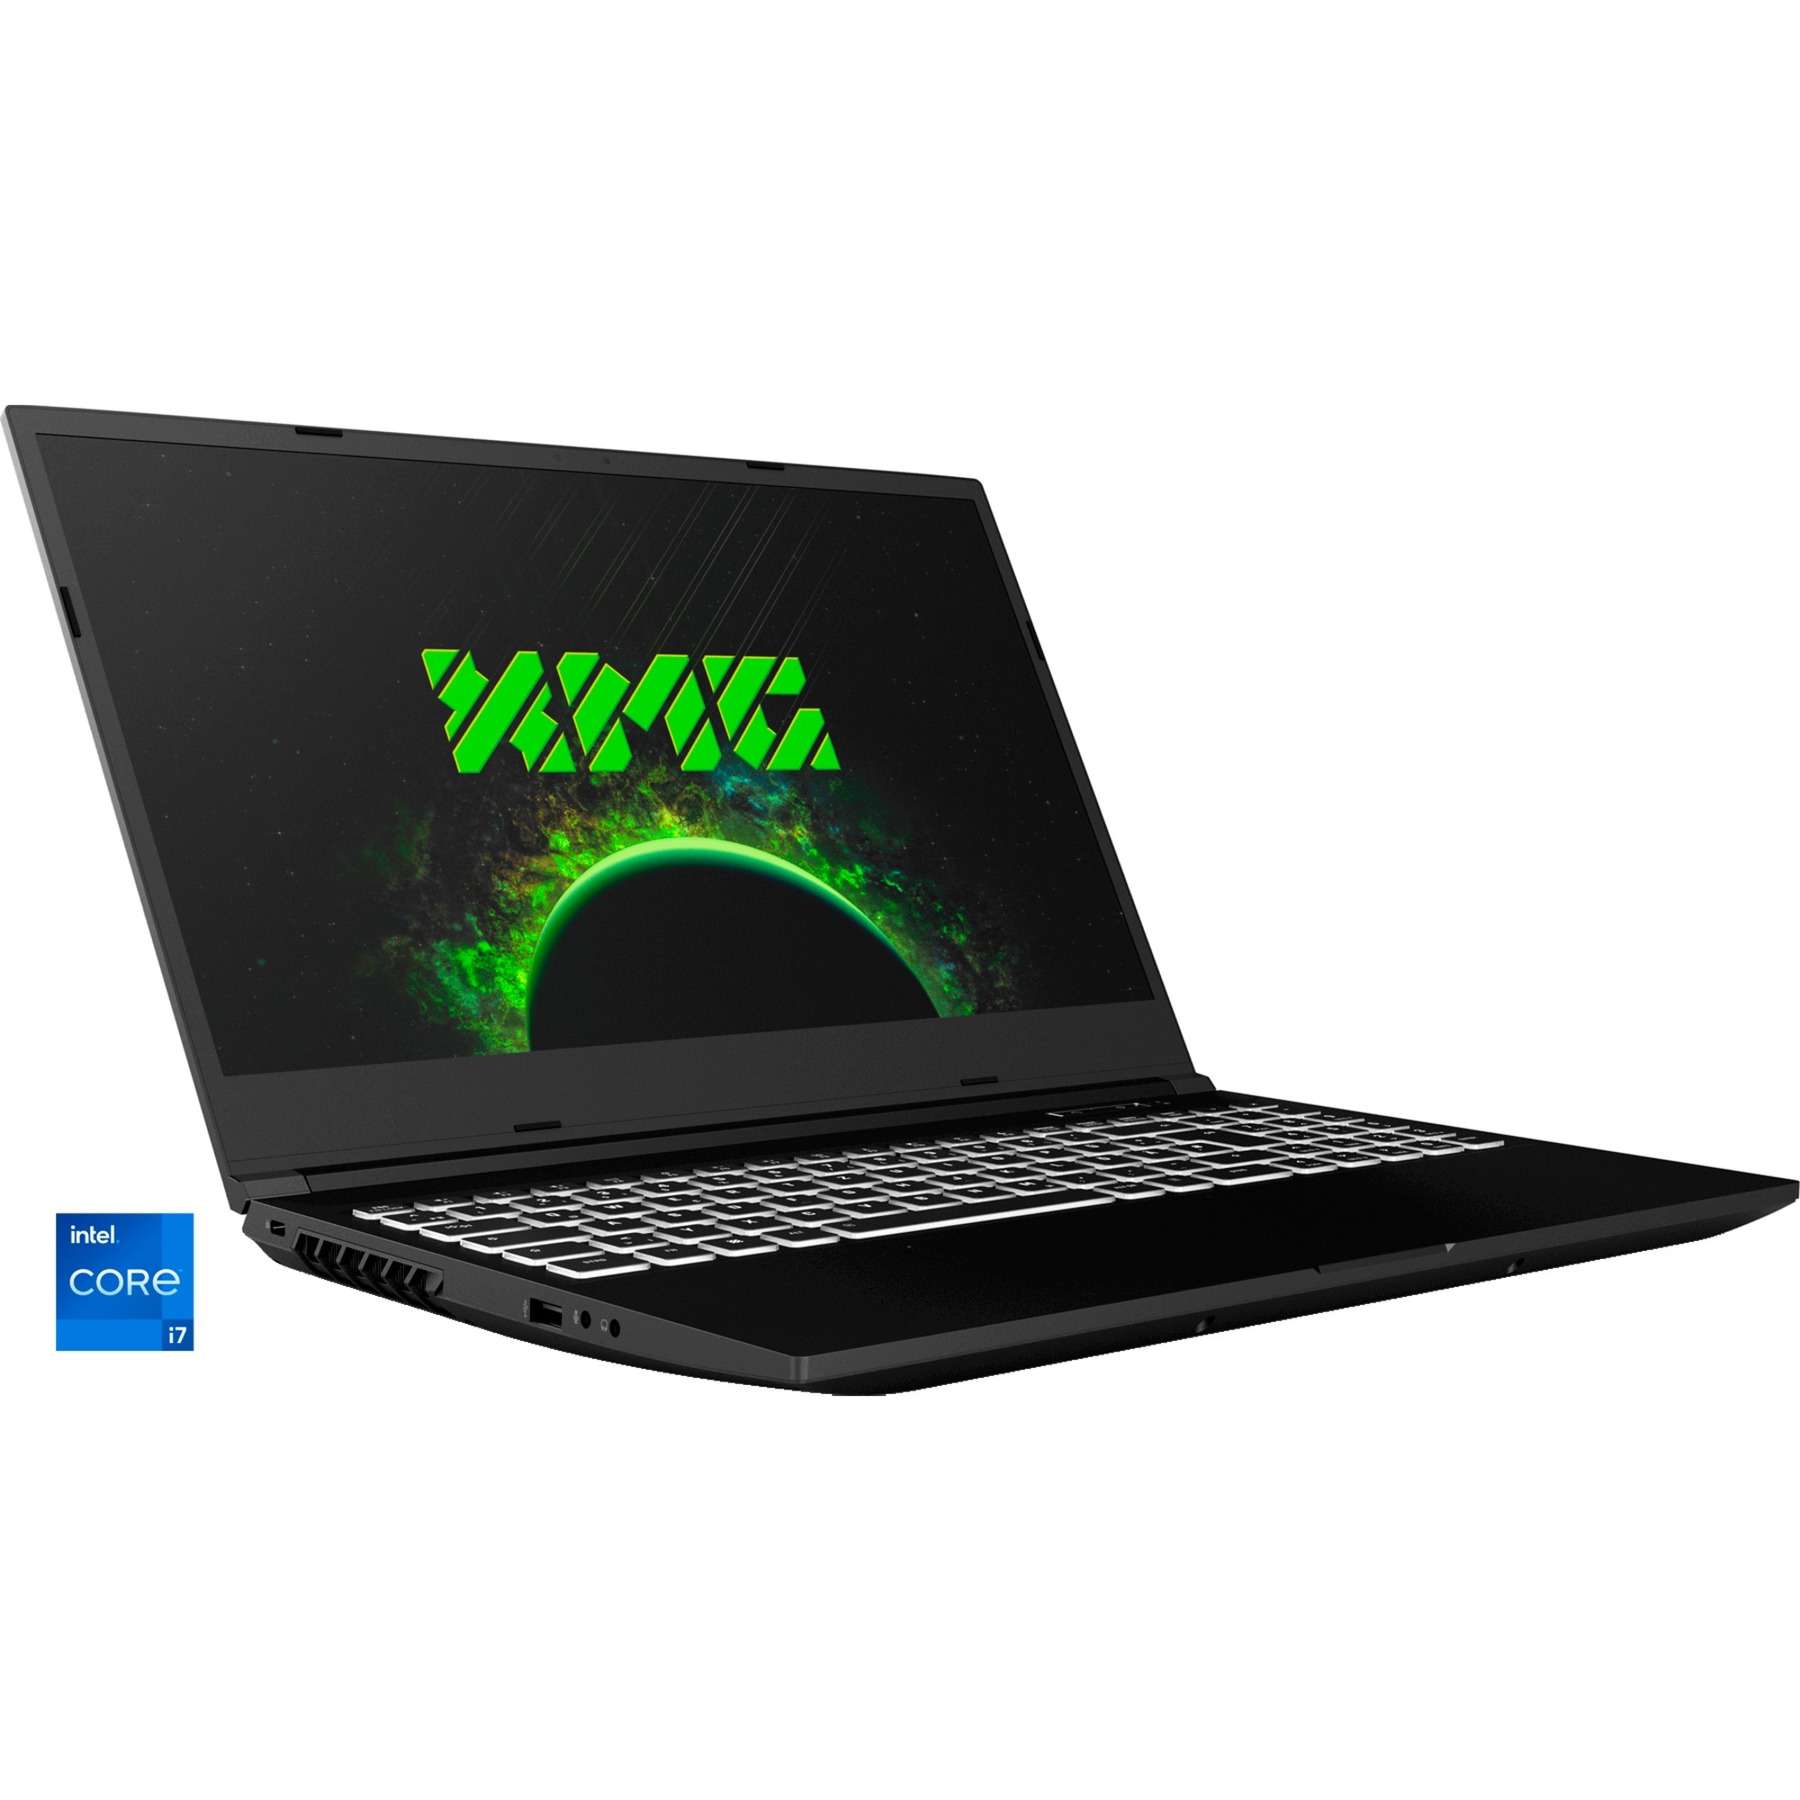 CORE 15 (10505850), Gaming-Notebook